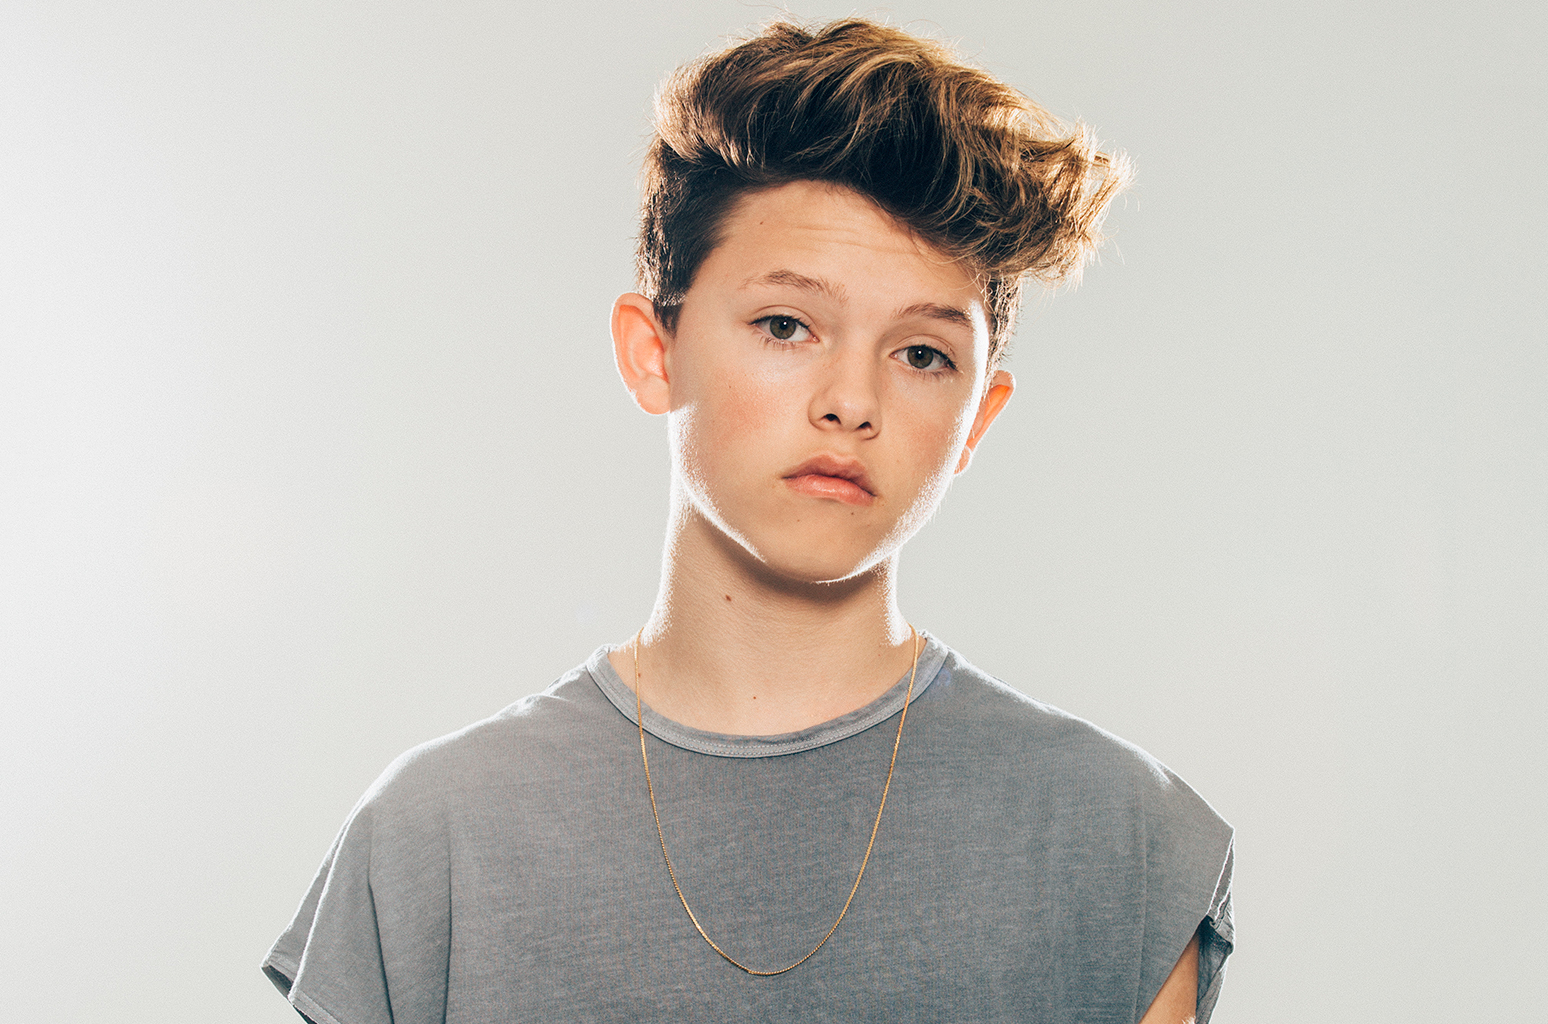 40 Facts about Jacob Sartorius - Facts.net